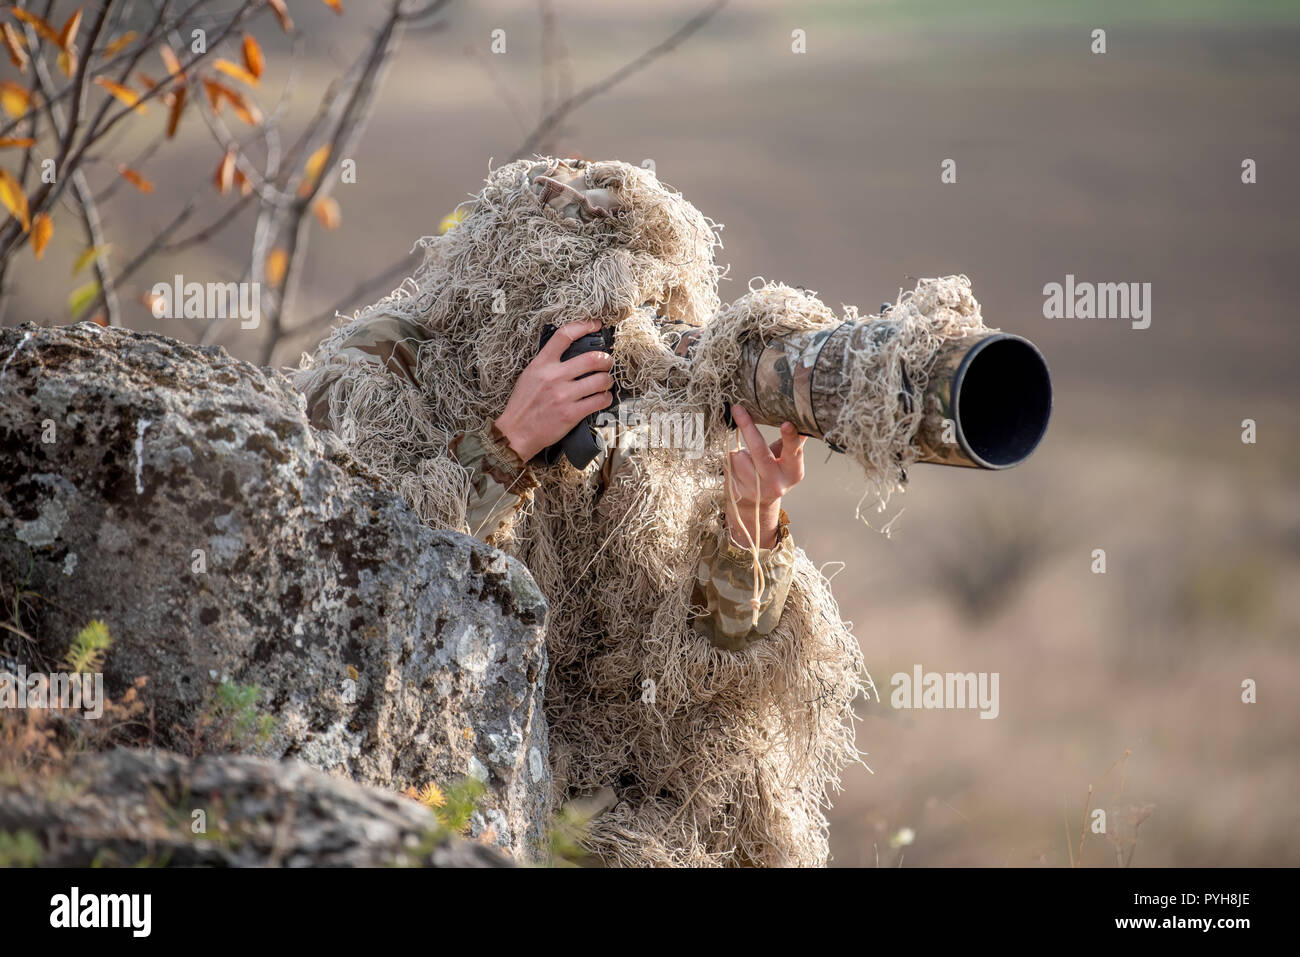 Wildlife Photographer In The Summer Ghillie Camouflage Suit Working In The  Wild Stock Photo, Picture and Royalty Free Image. Image 149757705.